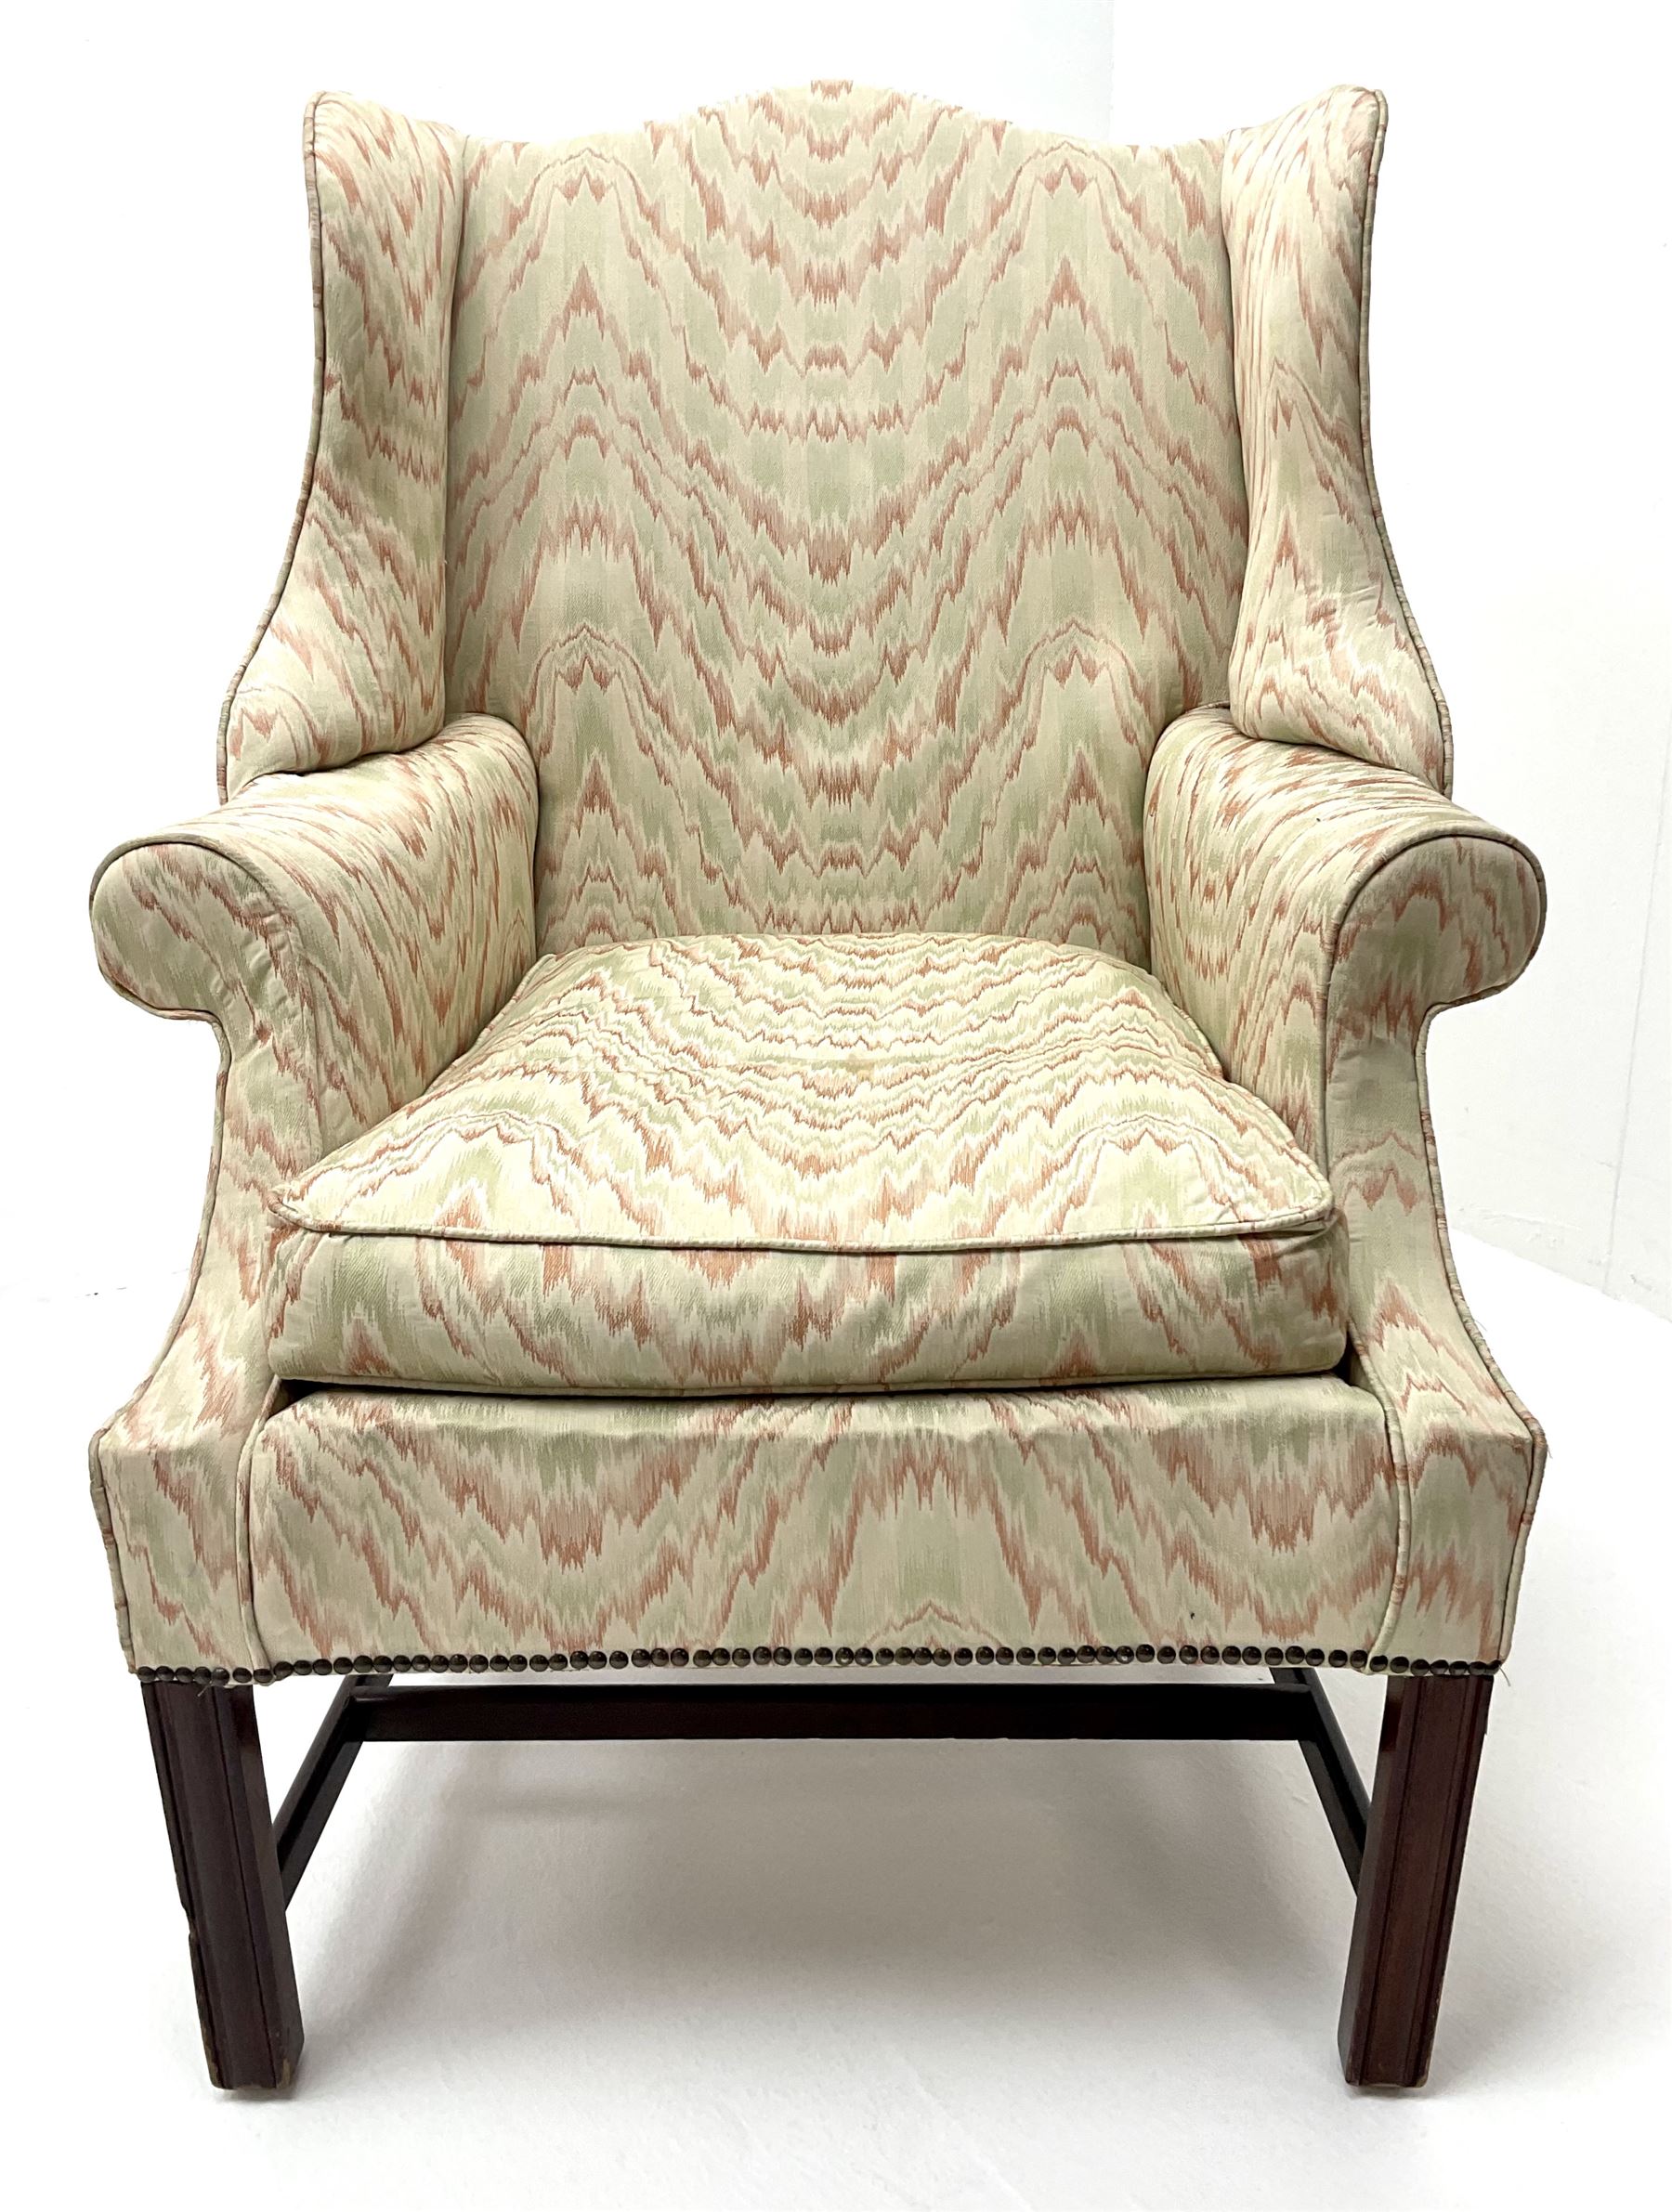 Georgian style mahogany framed wingback armchair upholstered in a beige ground fabric - Image 3 of 4